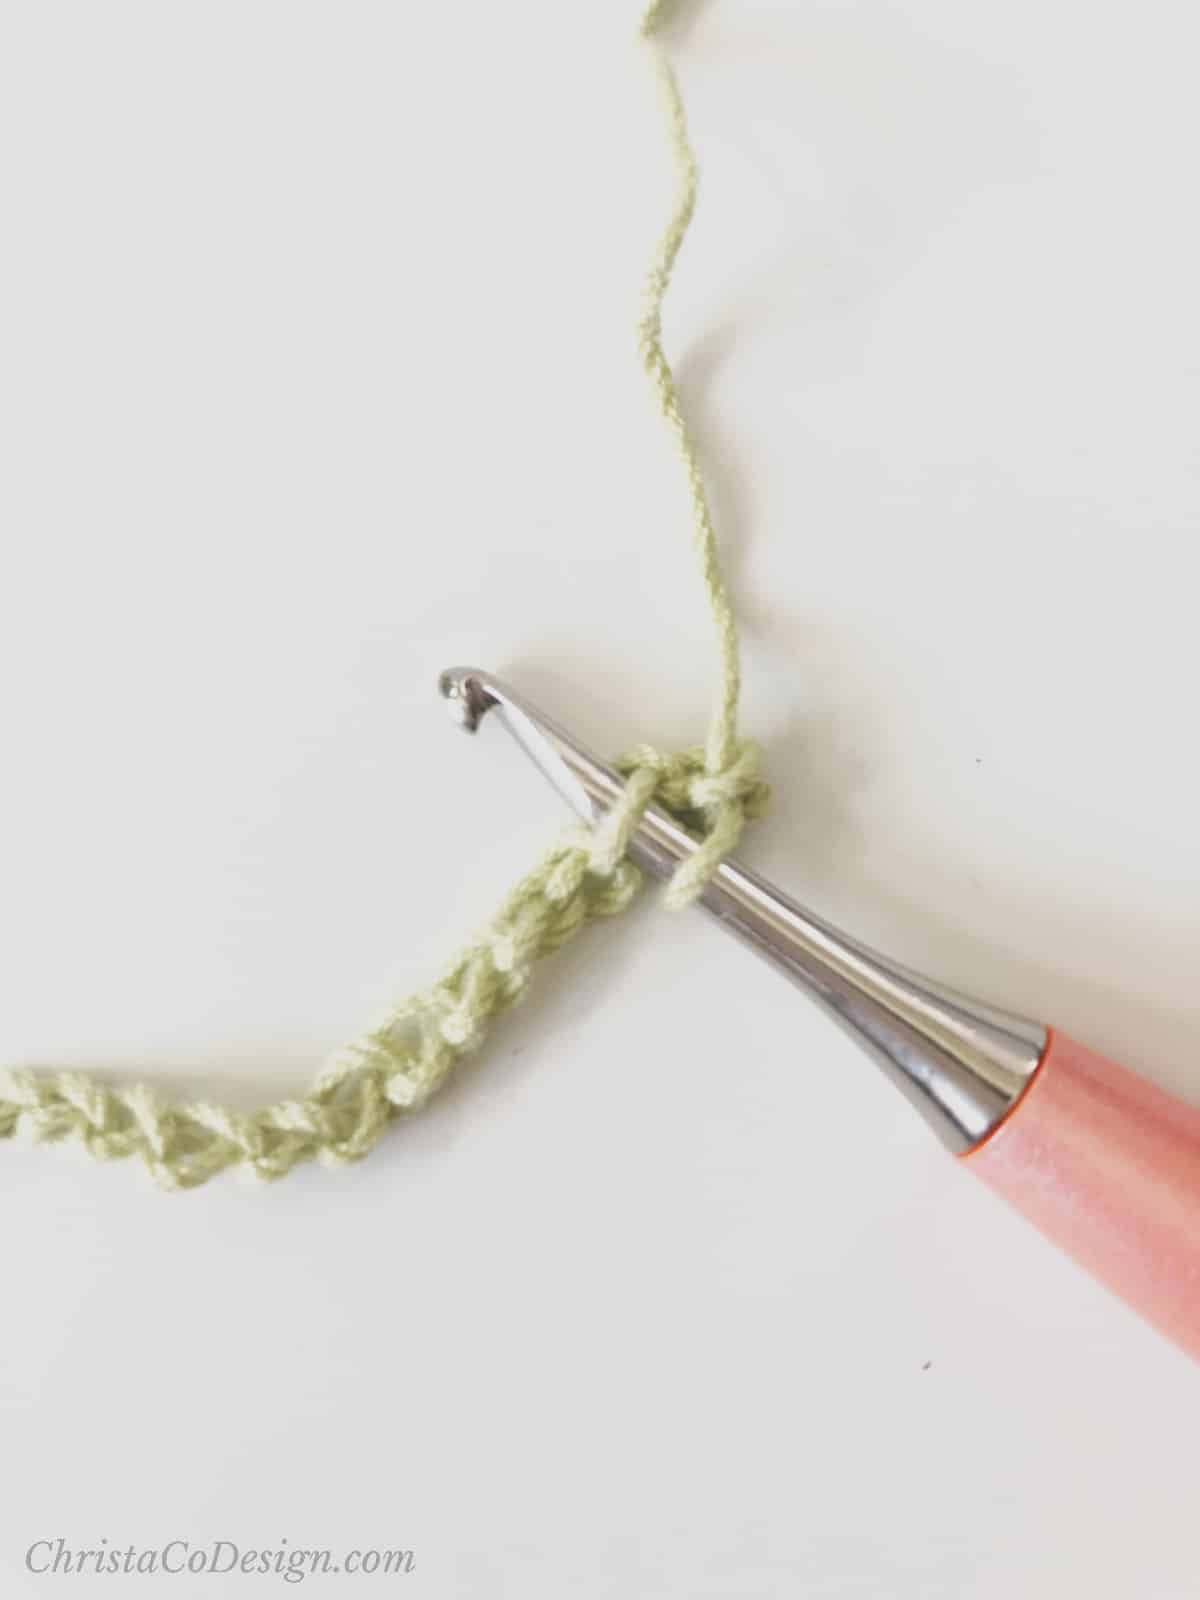 picture of peach crochet hook inserted into chain of green stitches